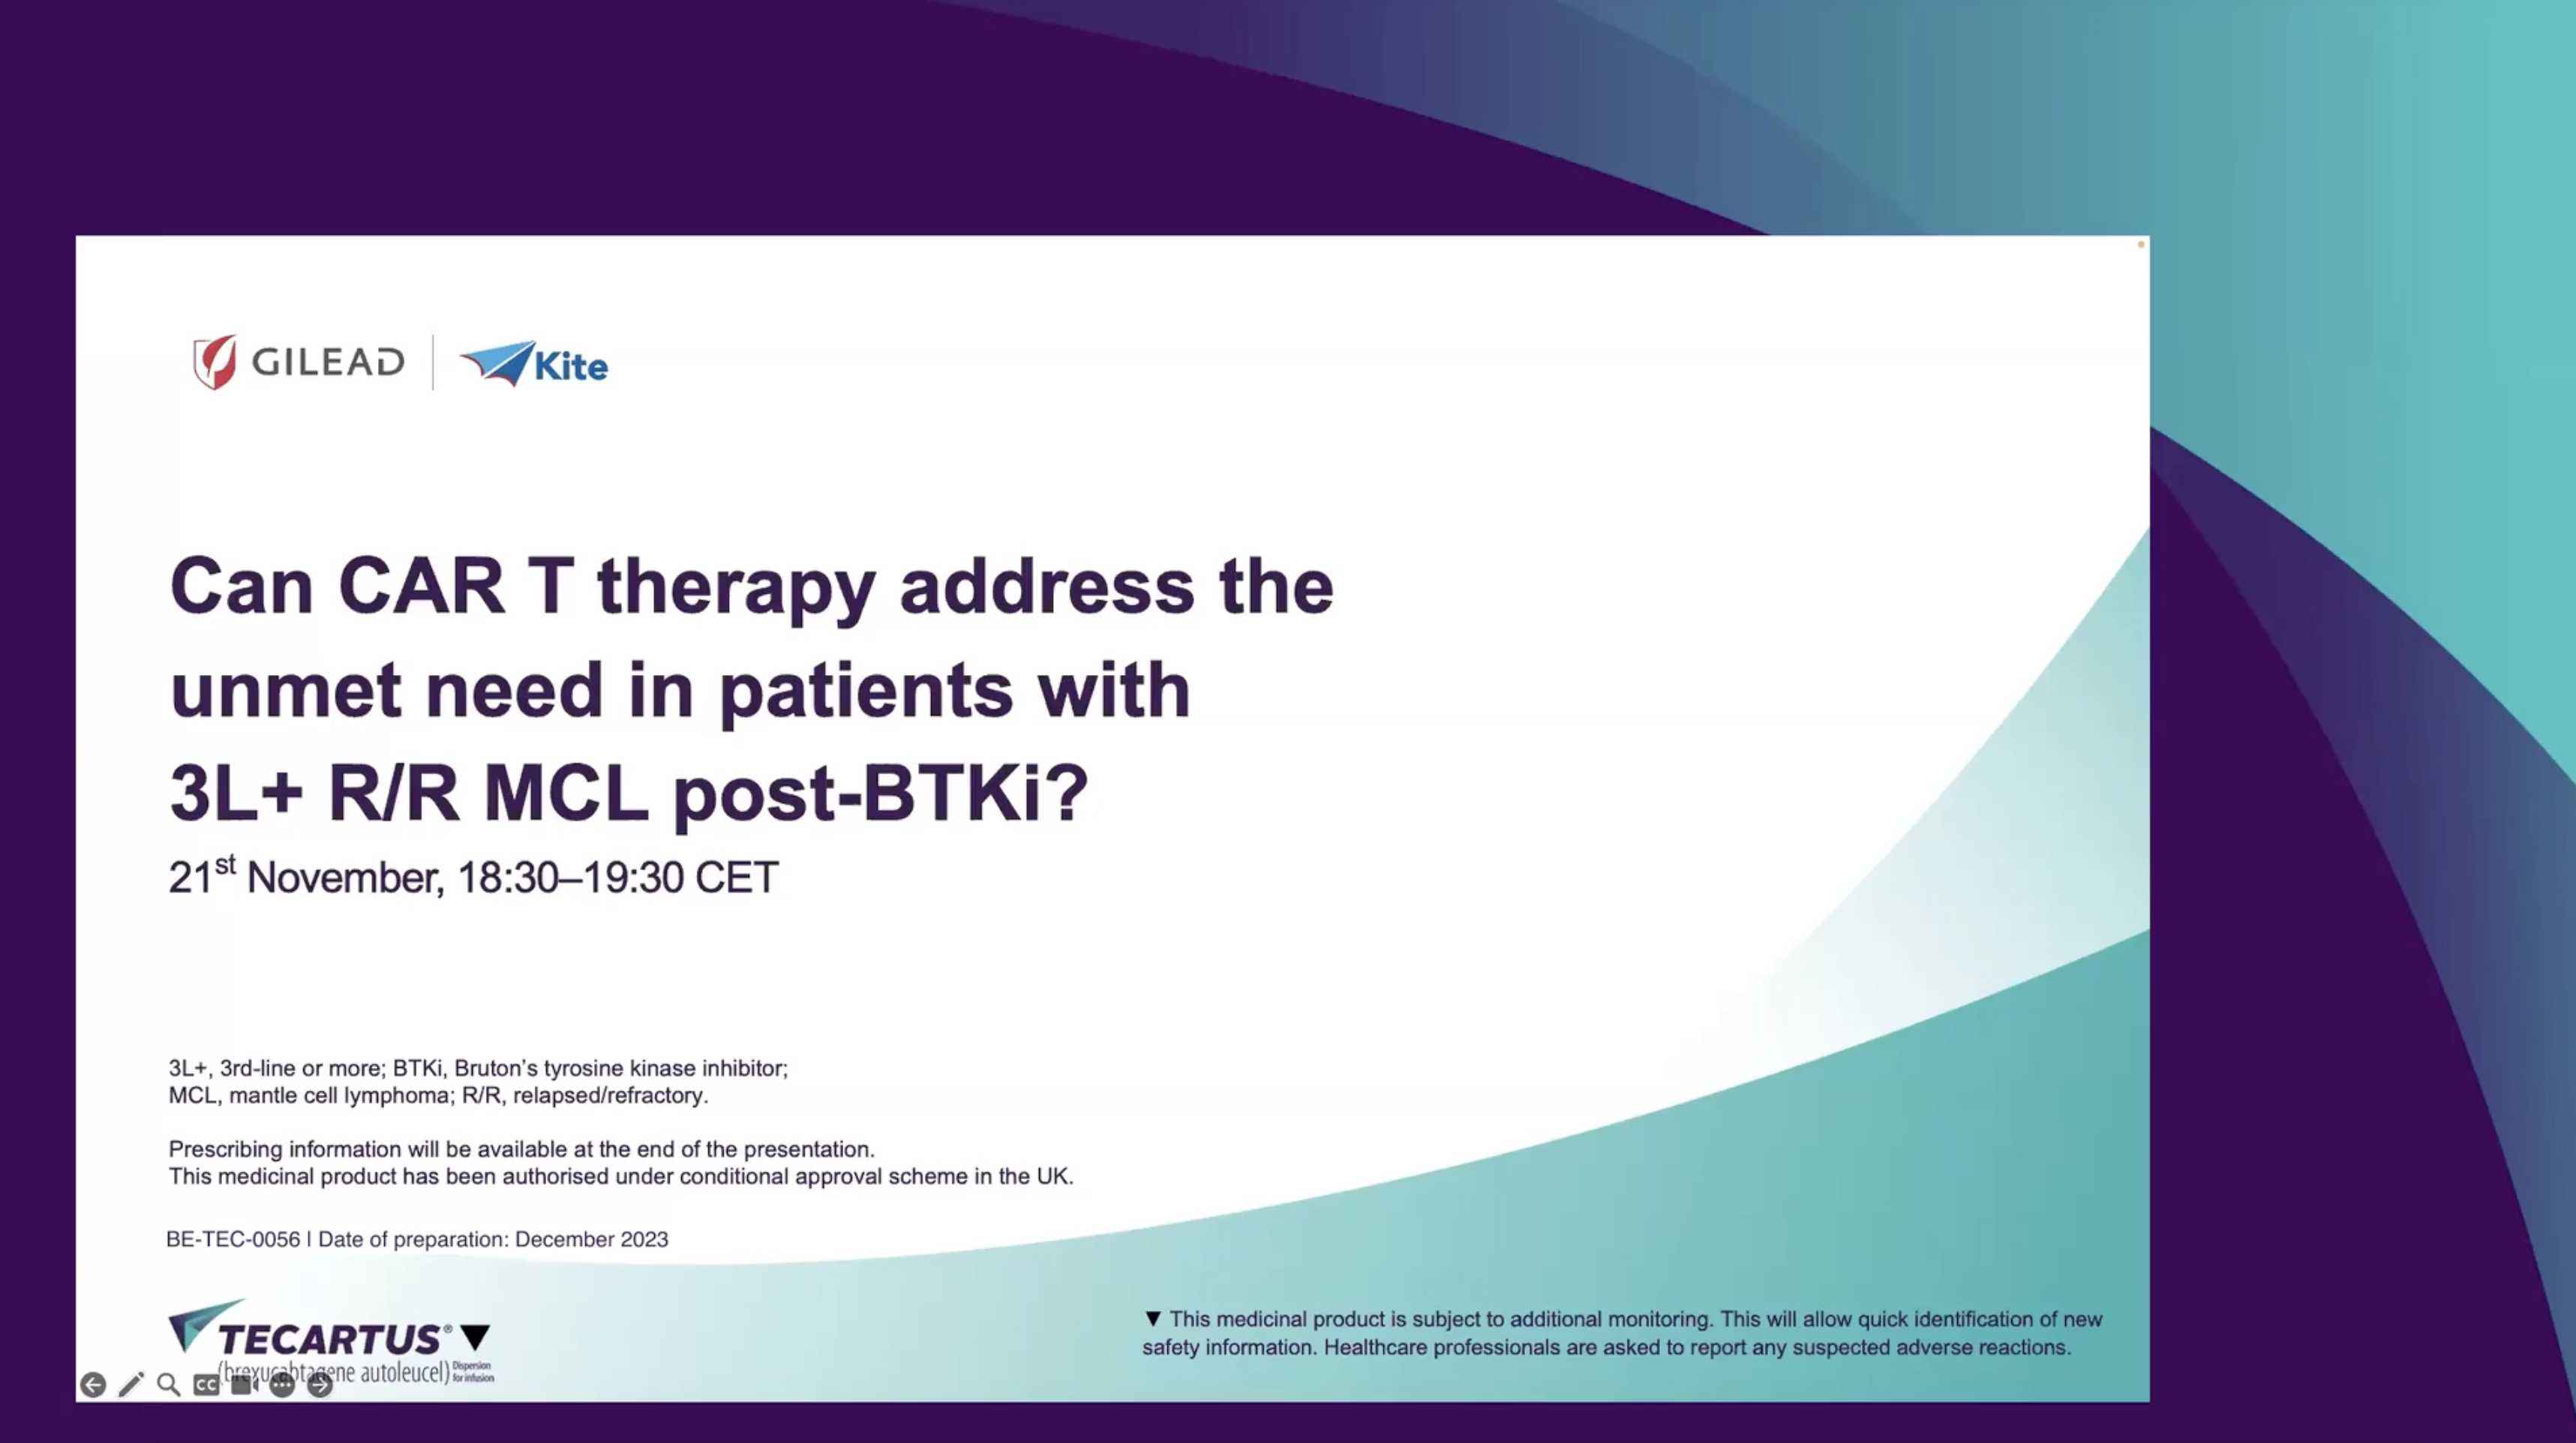 Can CAR T therapy address the unmet need in patients with 3L+ R/R MCL post-BTKi?